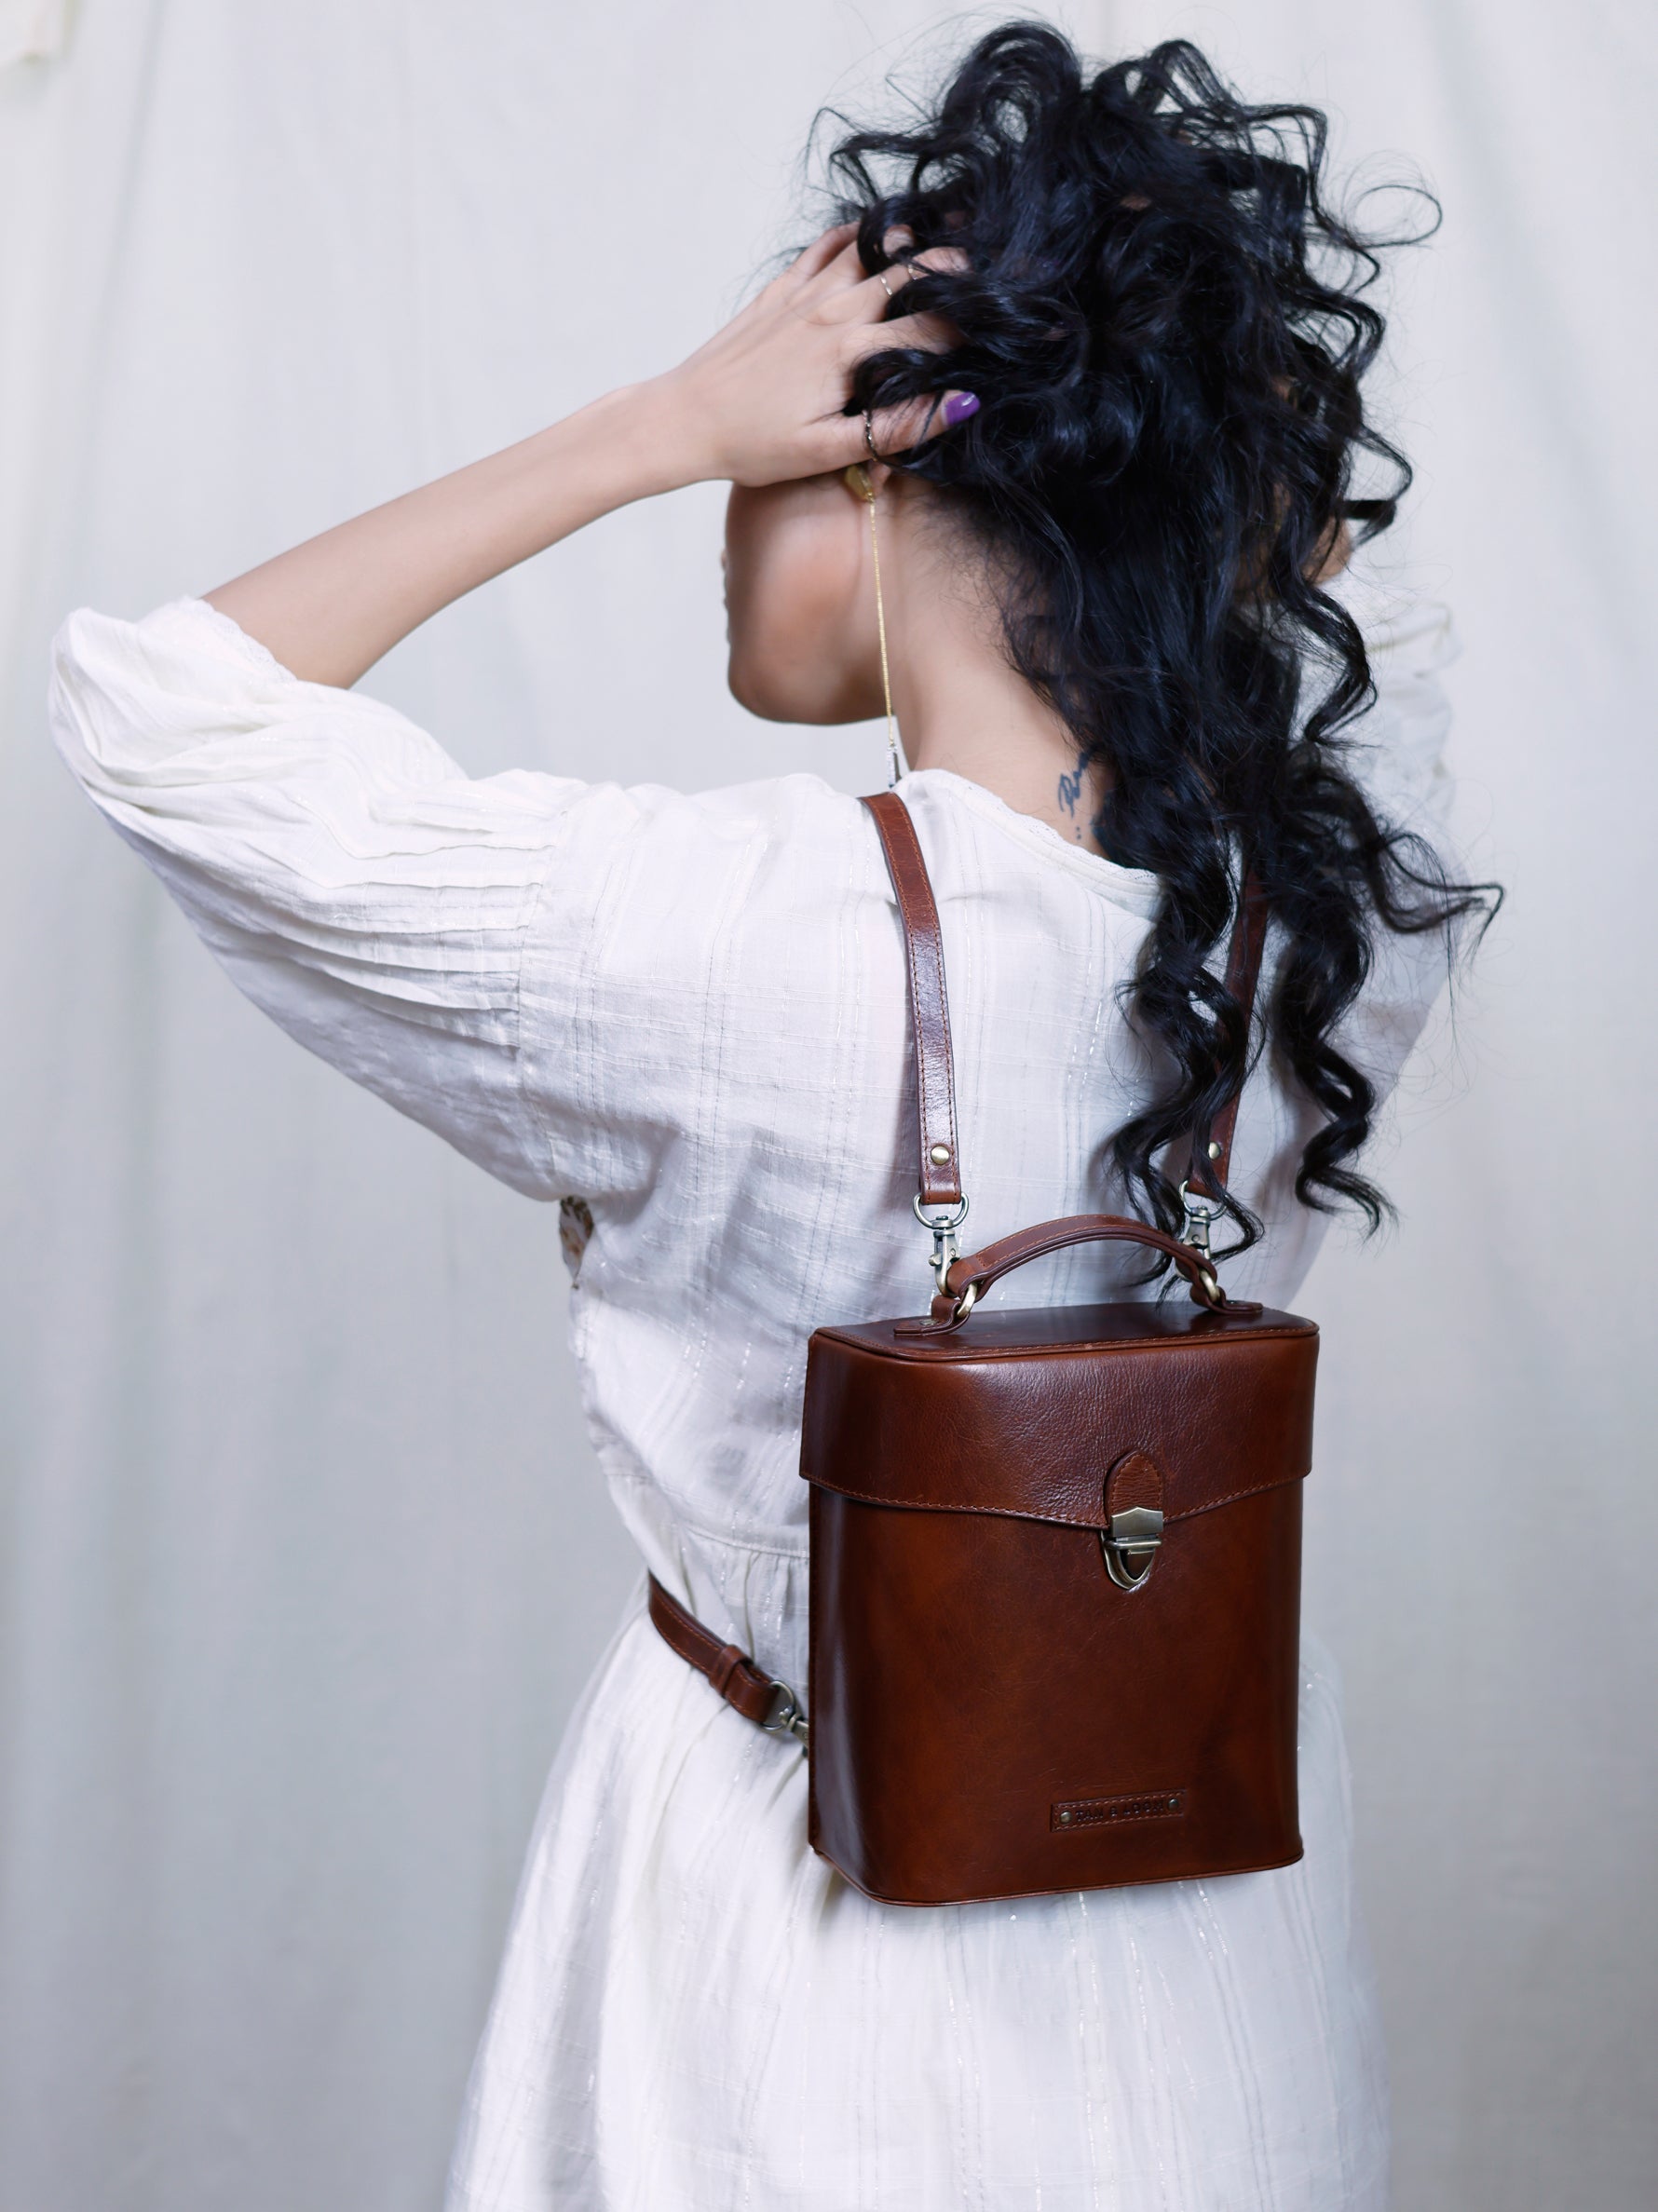 Handcrafted Genuine Vegetable Tanned Leather Letter Box Backpack Vintage Brown for Women Tan & Loom